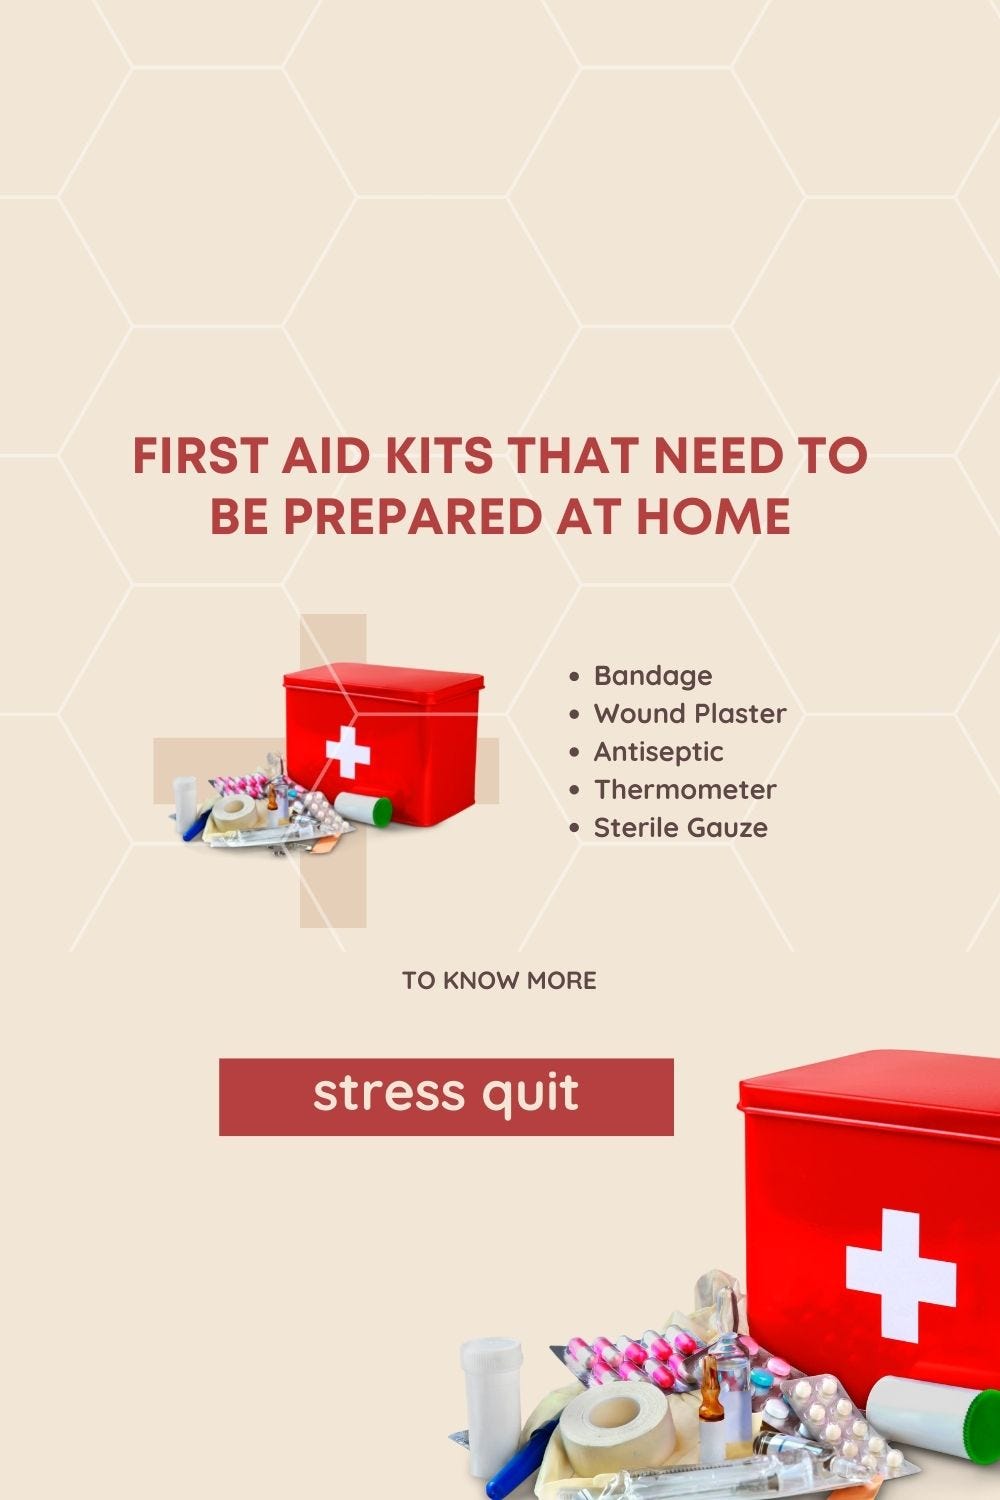 What is the Importance of a First Aid Kit